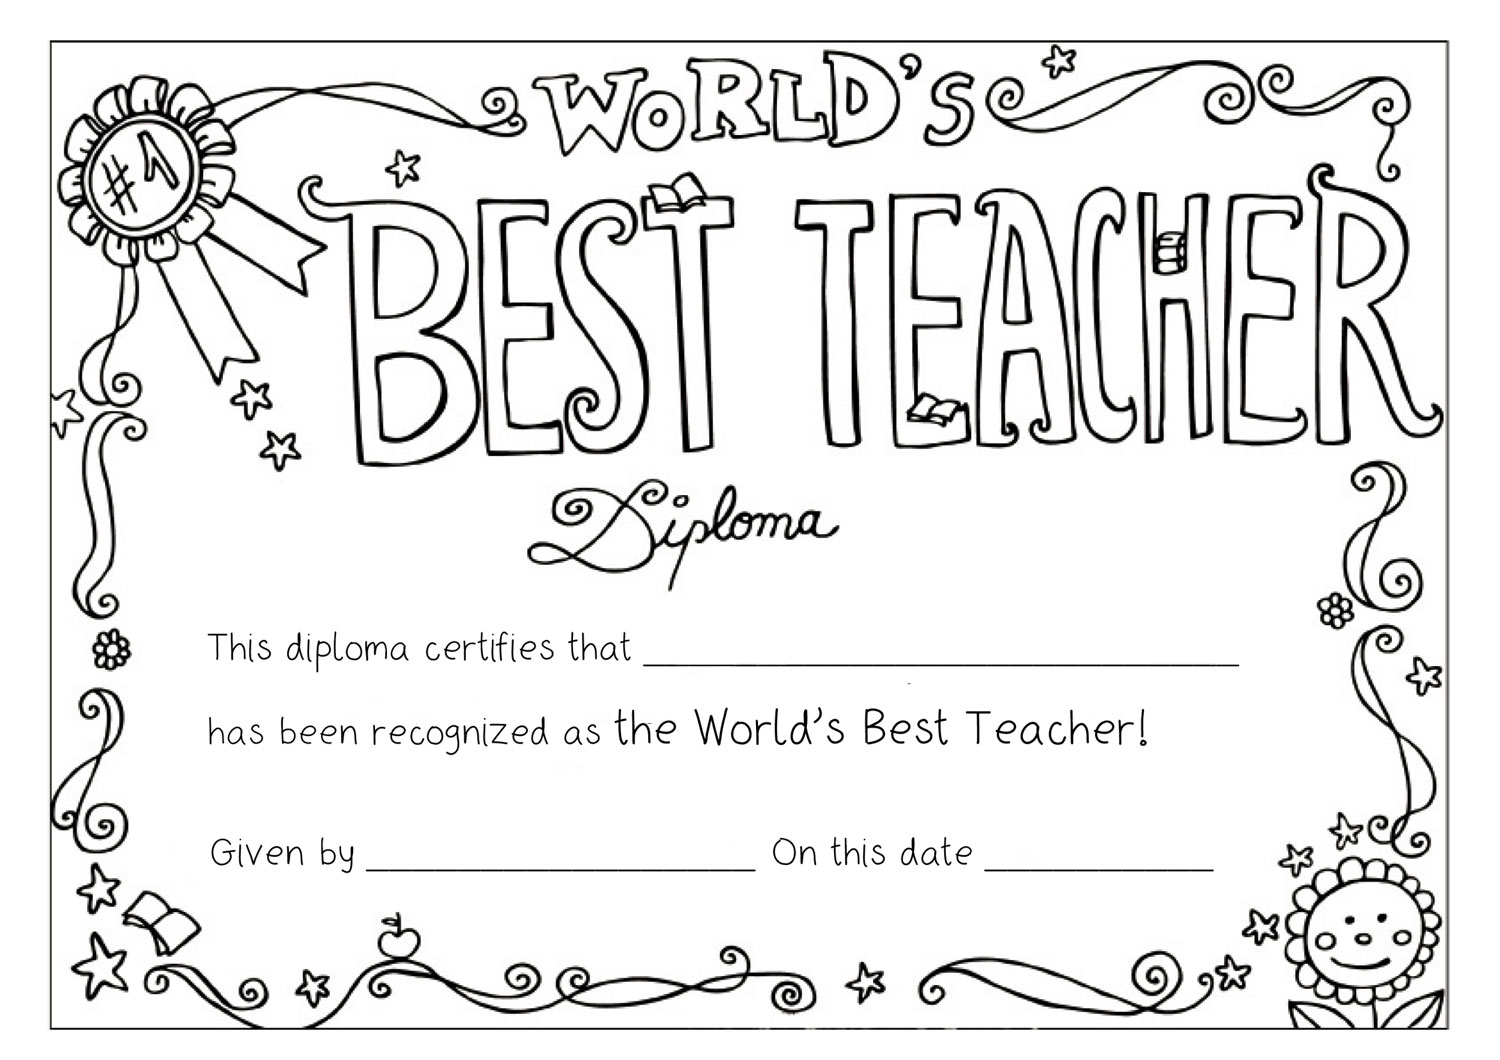 coloring pages teacher appreciation day